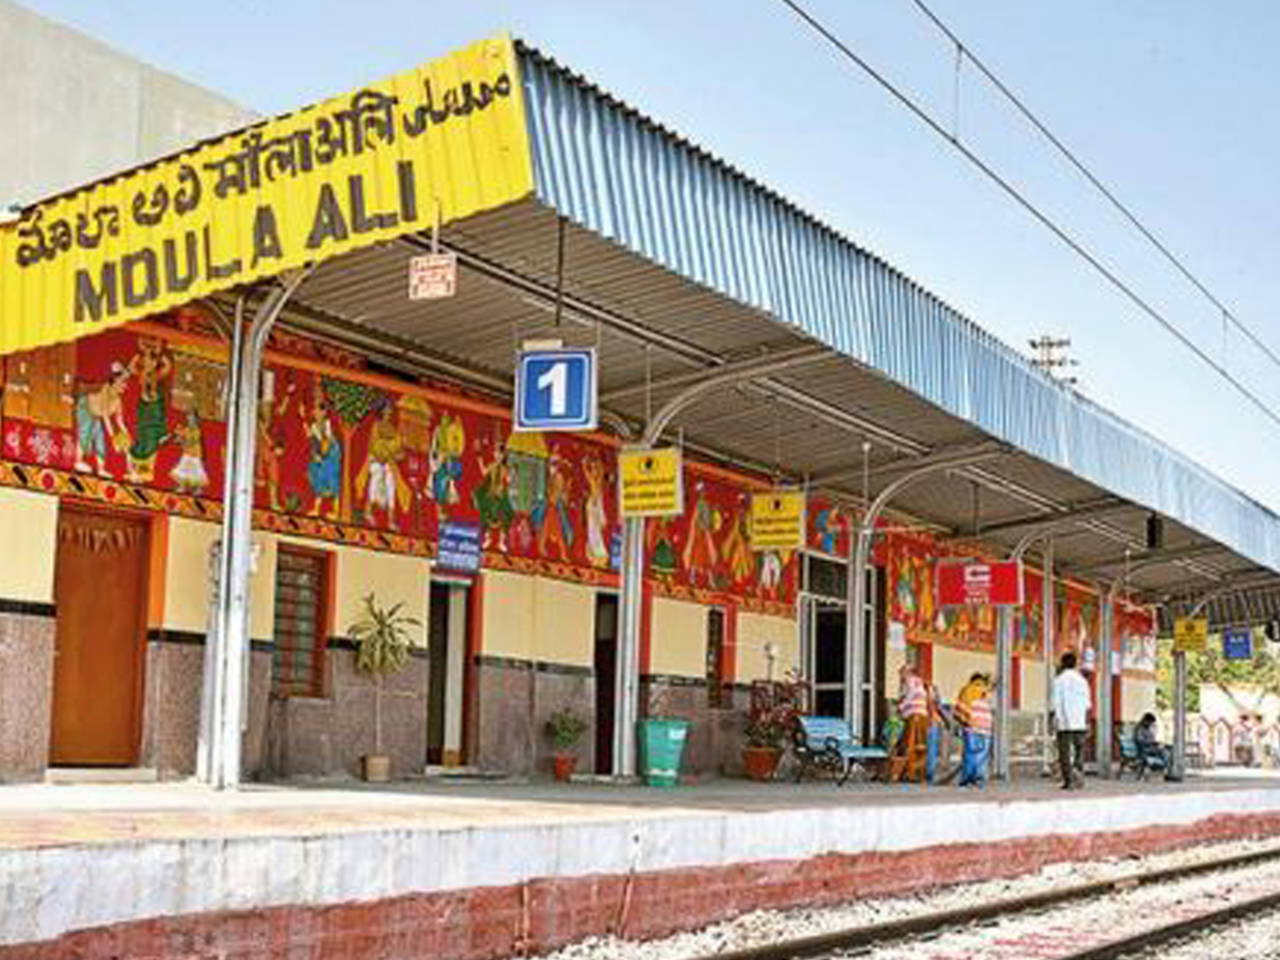 Riding on a high: Moula Ali railway station bags 'Adarsh' tag ...